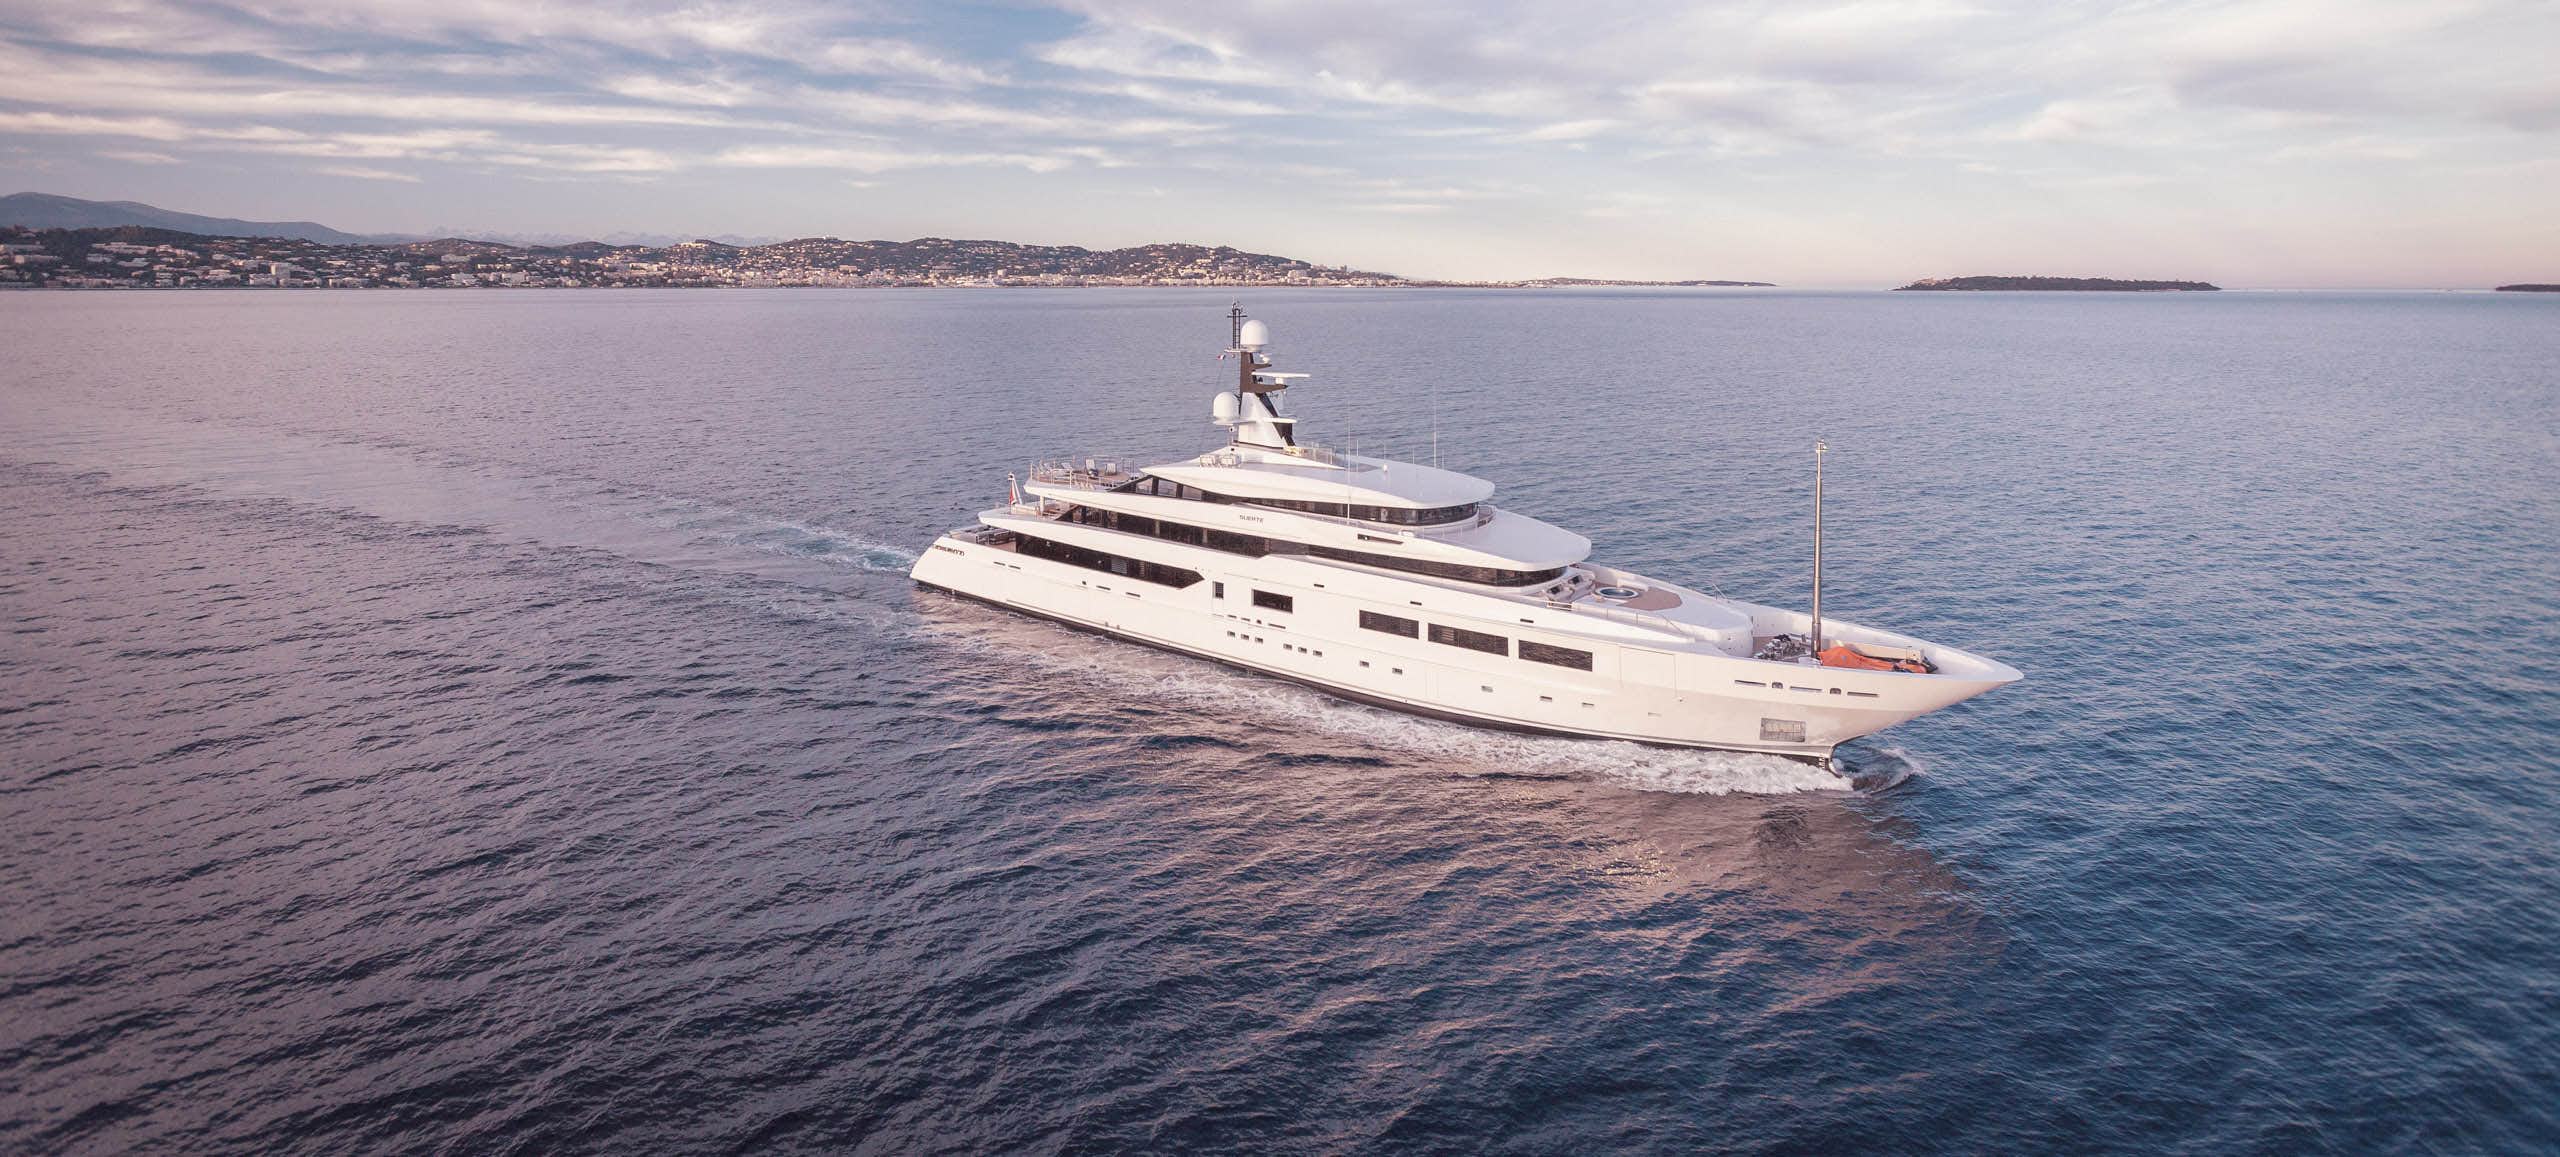 Side view of a superyacht cruising in blue sea | Yacht for Sale |N&J